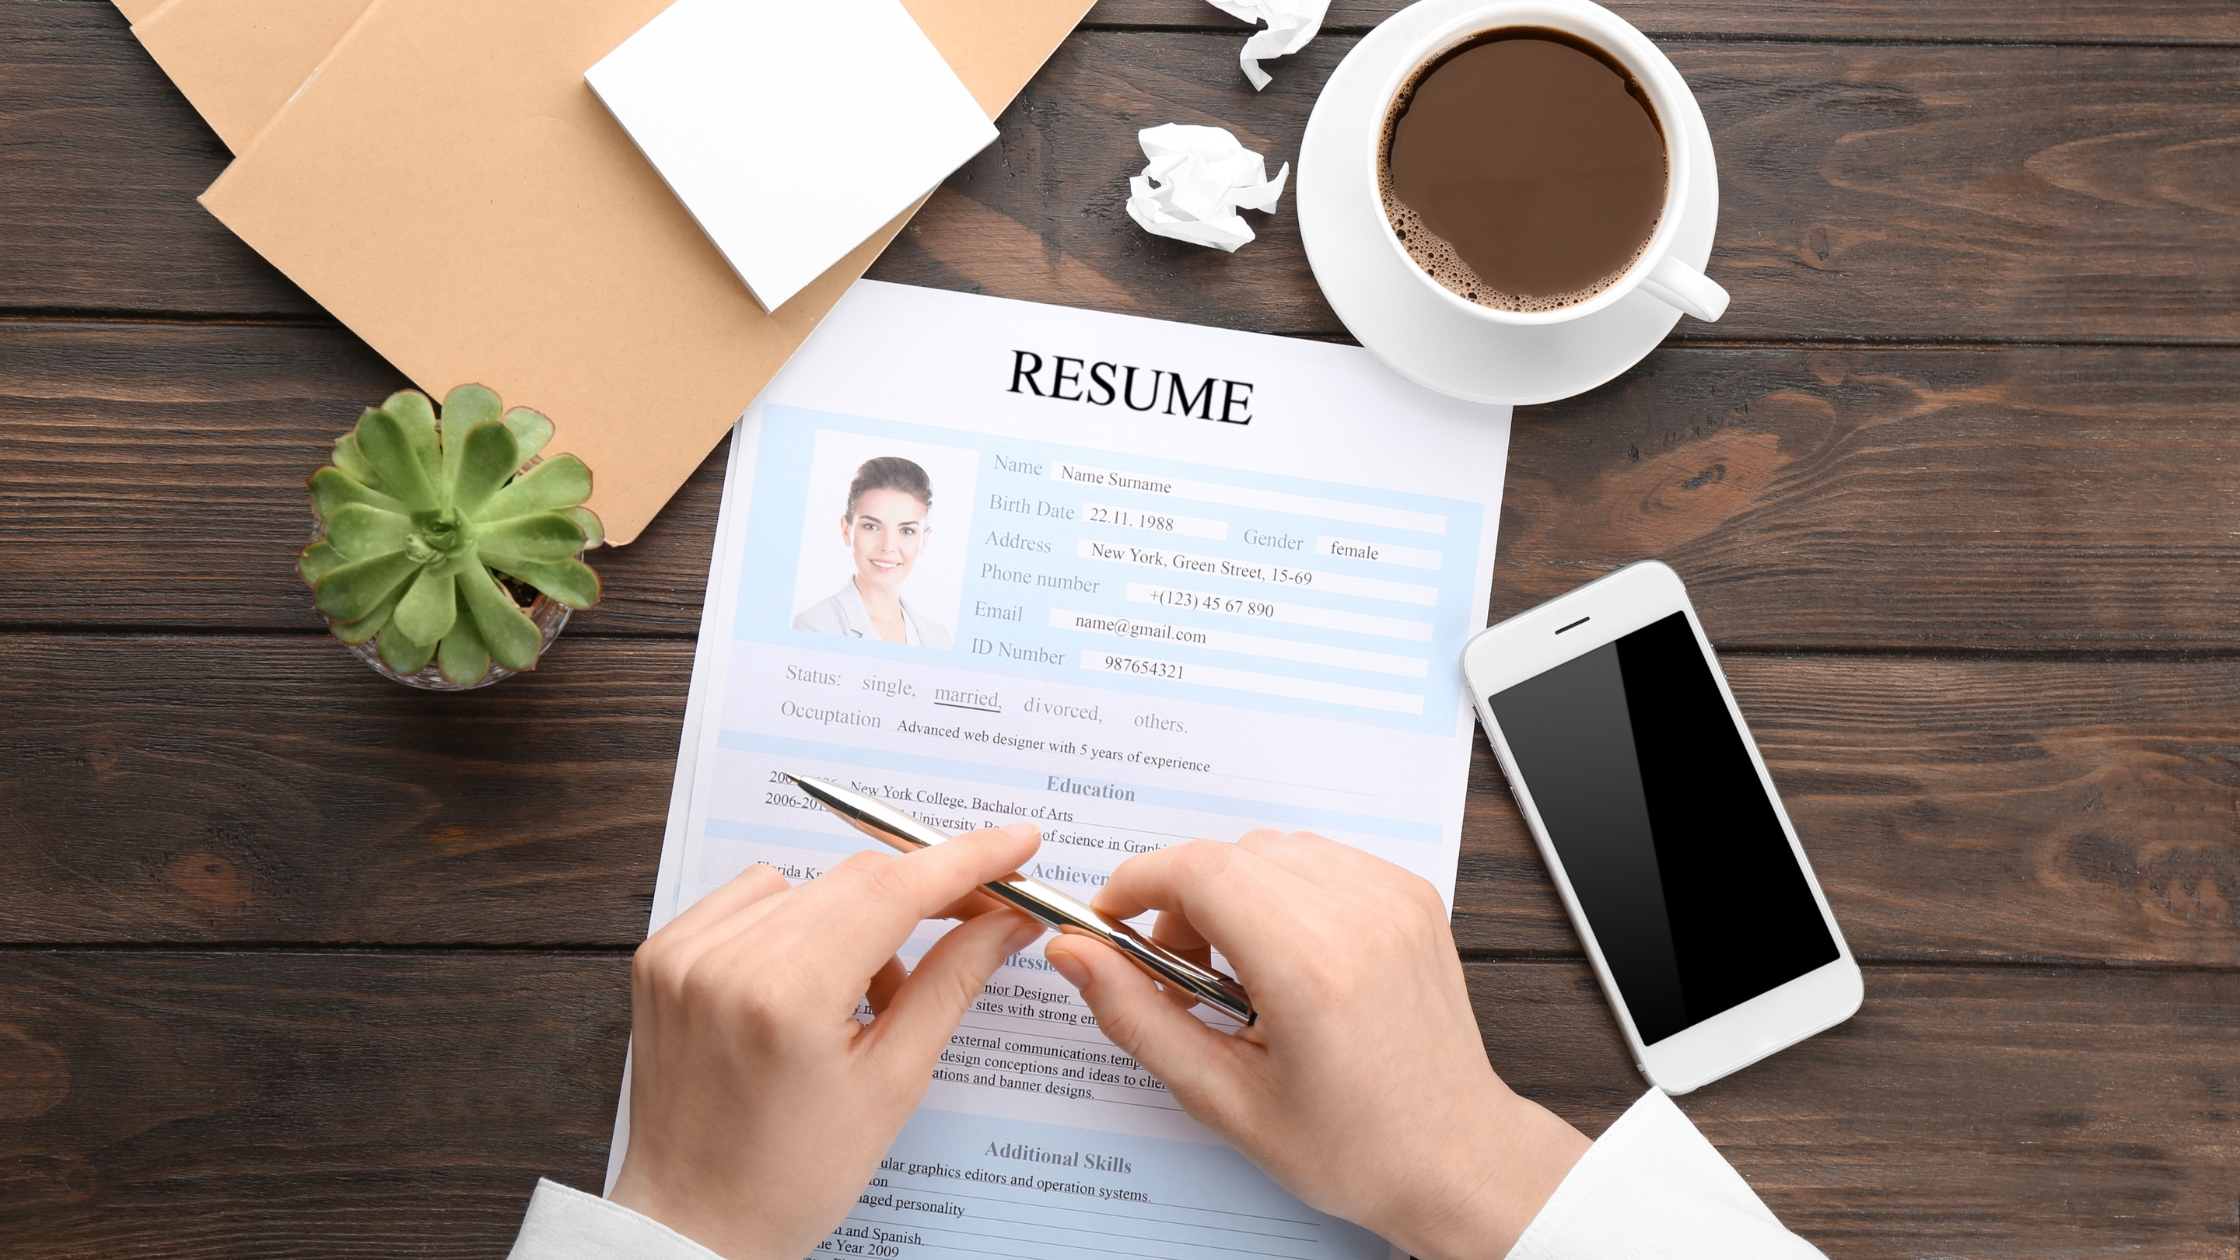 Forbes: How Senior-Level Candidates Can Make Their Resumes Stand Out